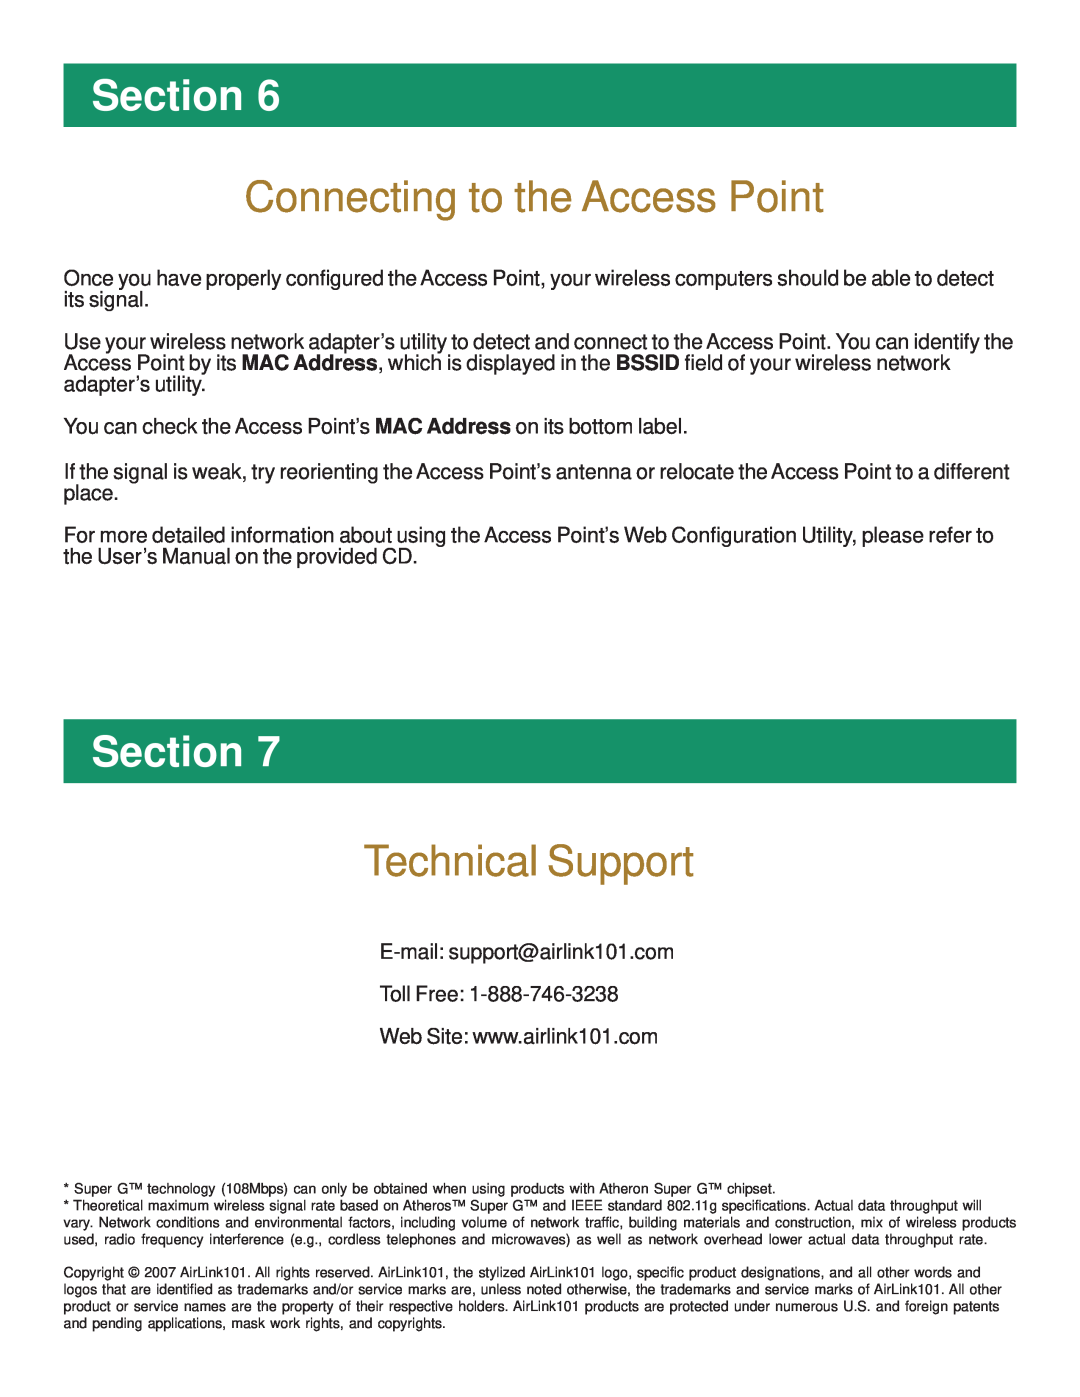 Airlink AP431W manual Connecting to the Access Point, Technical Support, Section 